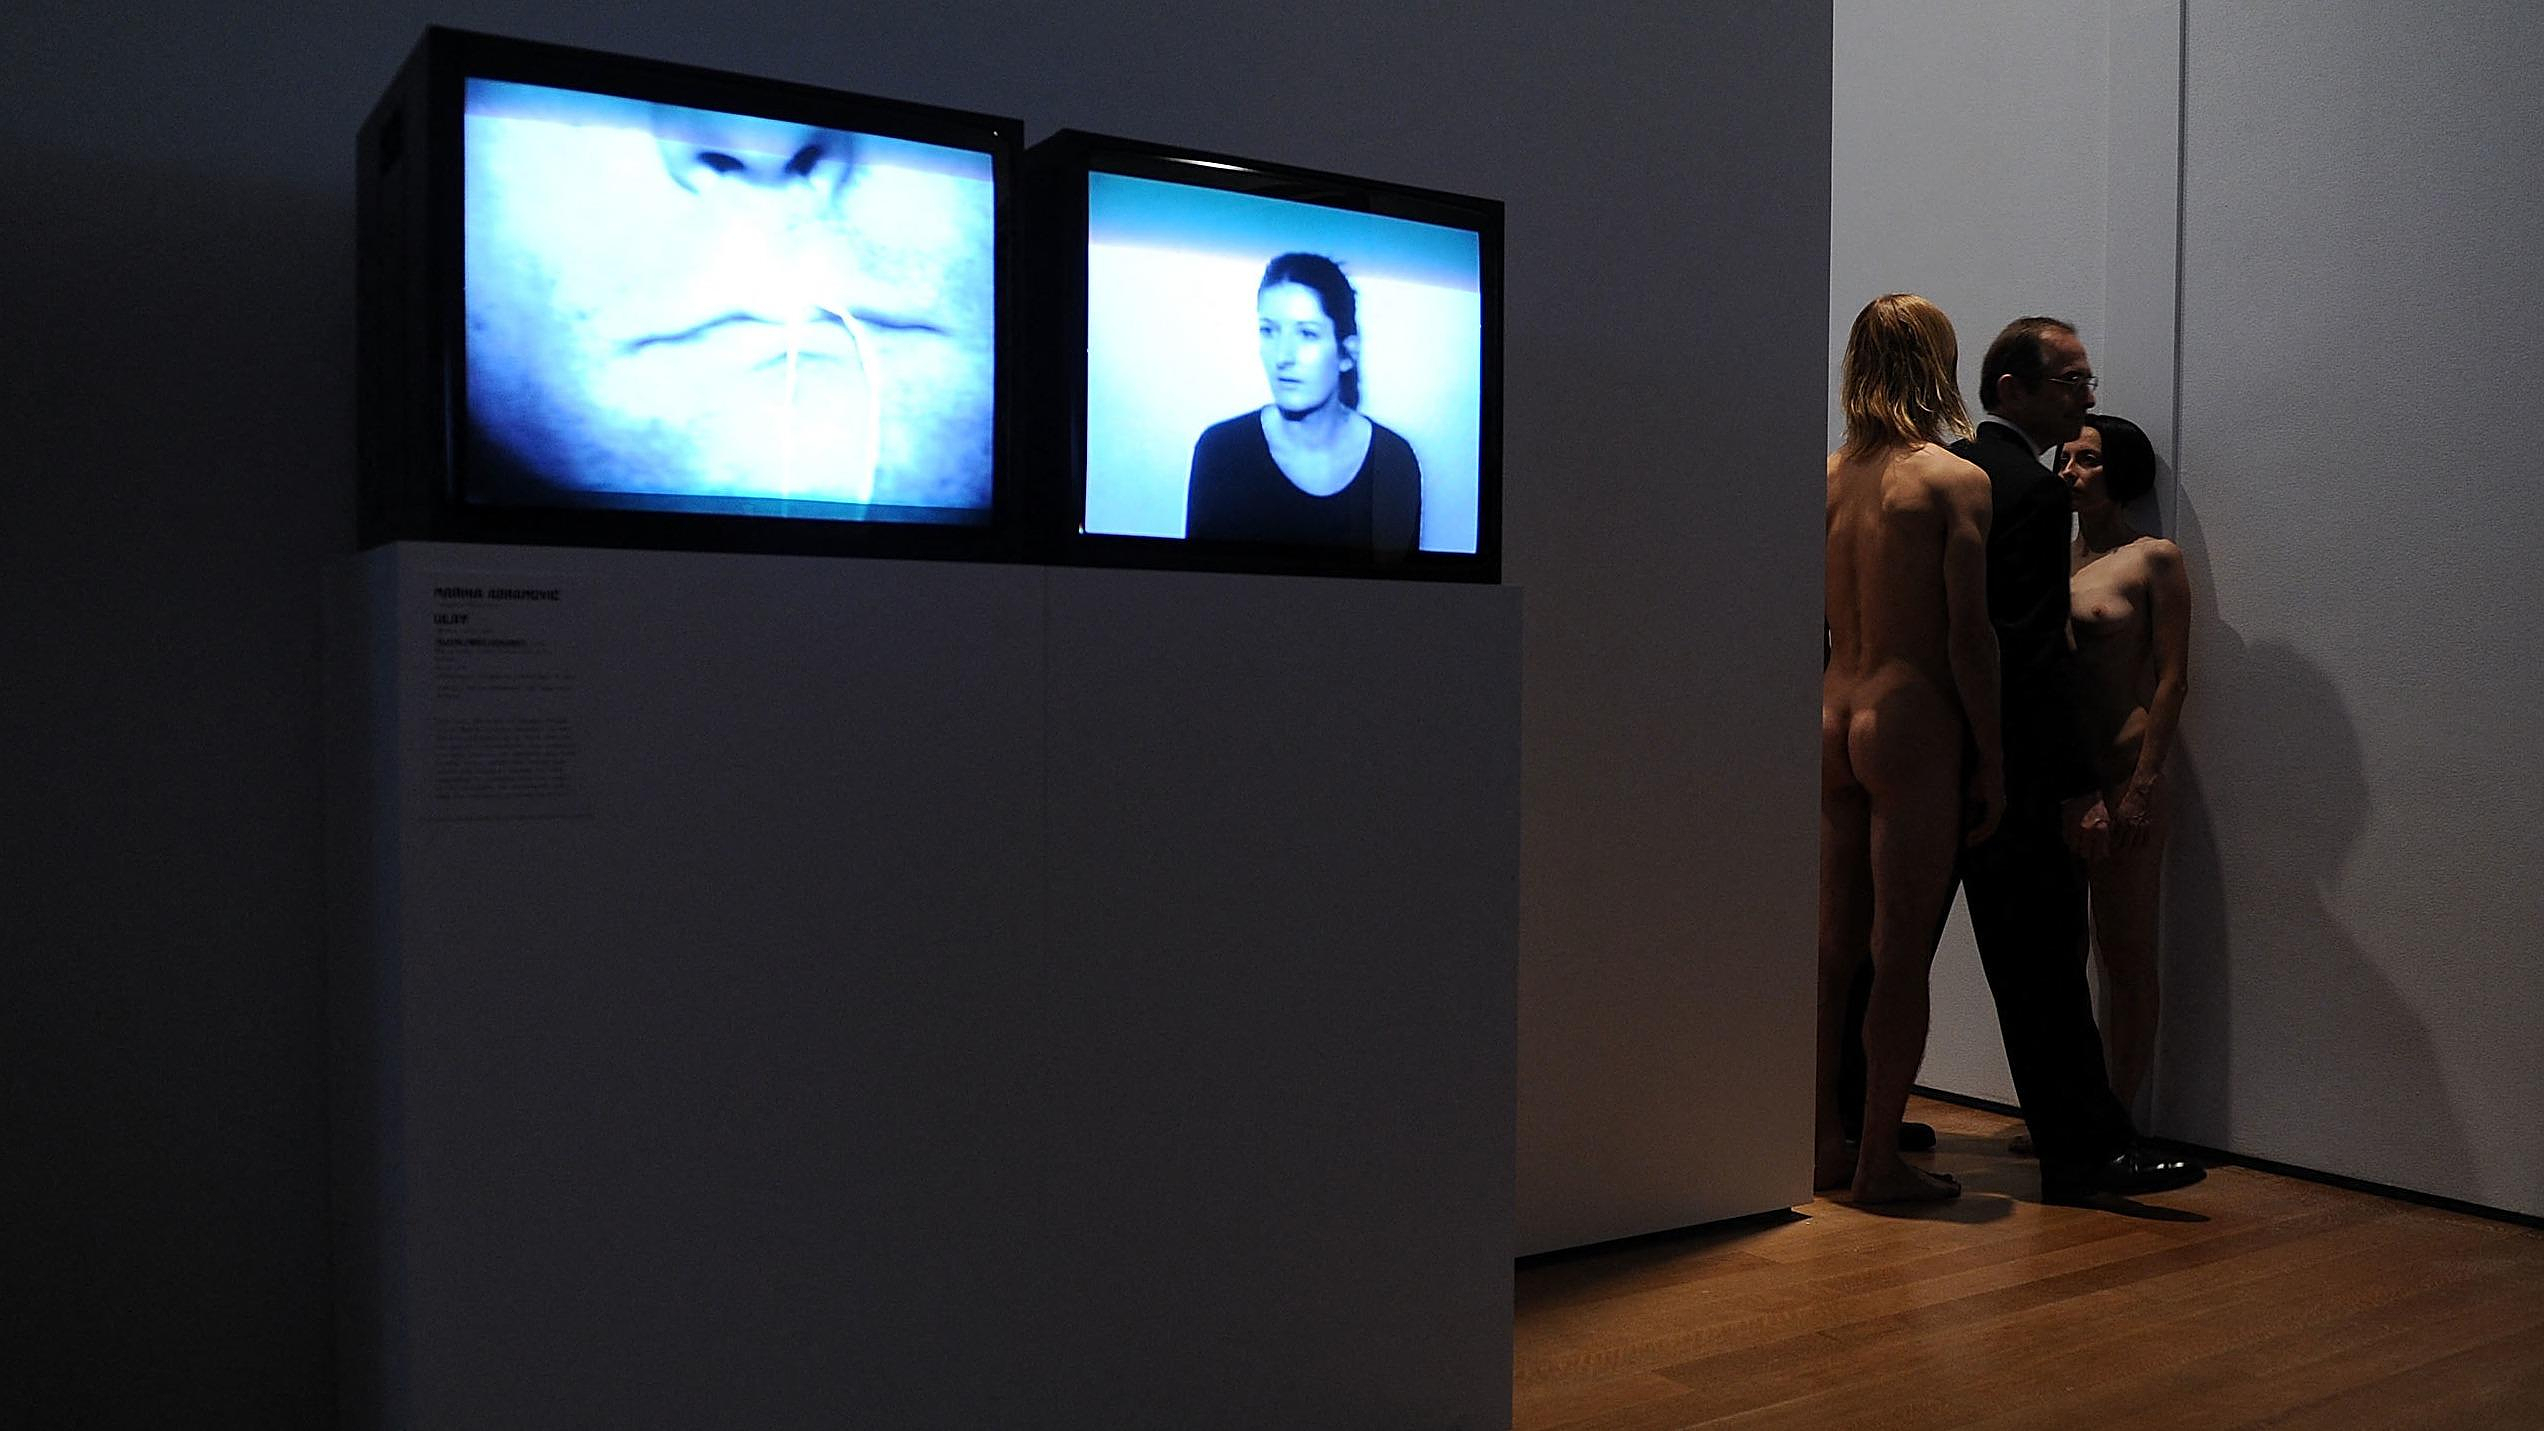 Fourteen years after a nude performance, an artist files a complaint against MoMA